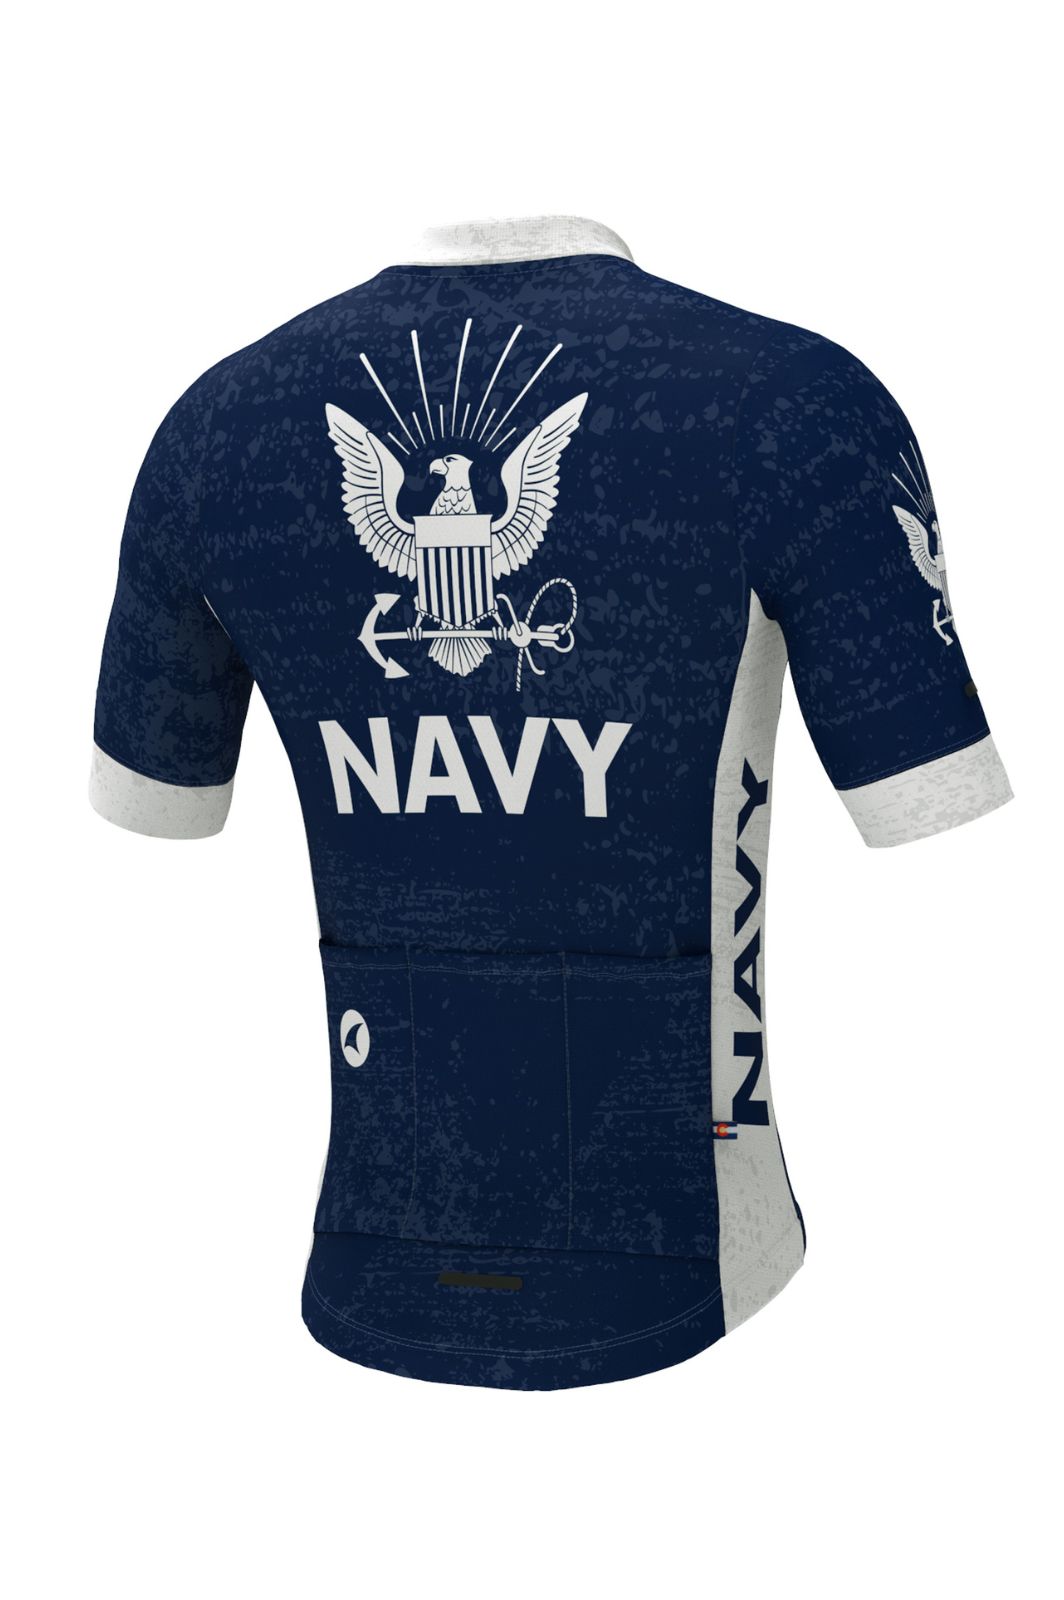 Men's US Navy Cycling Jerseys | USA Military | Pactimo